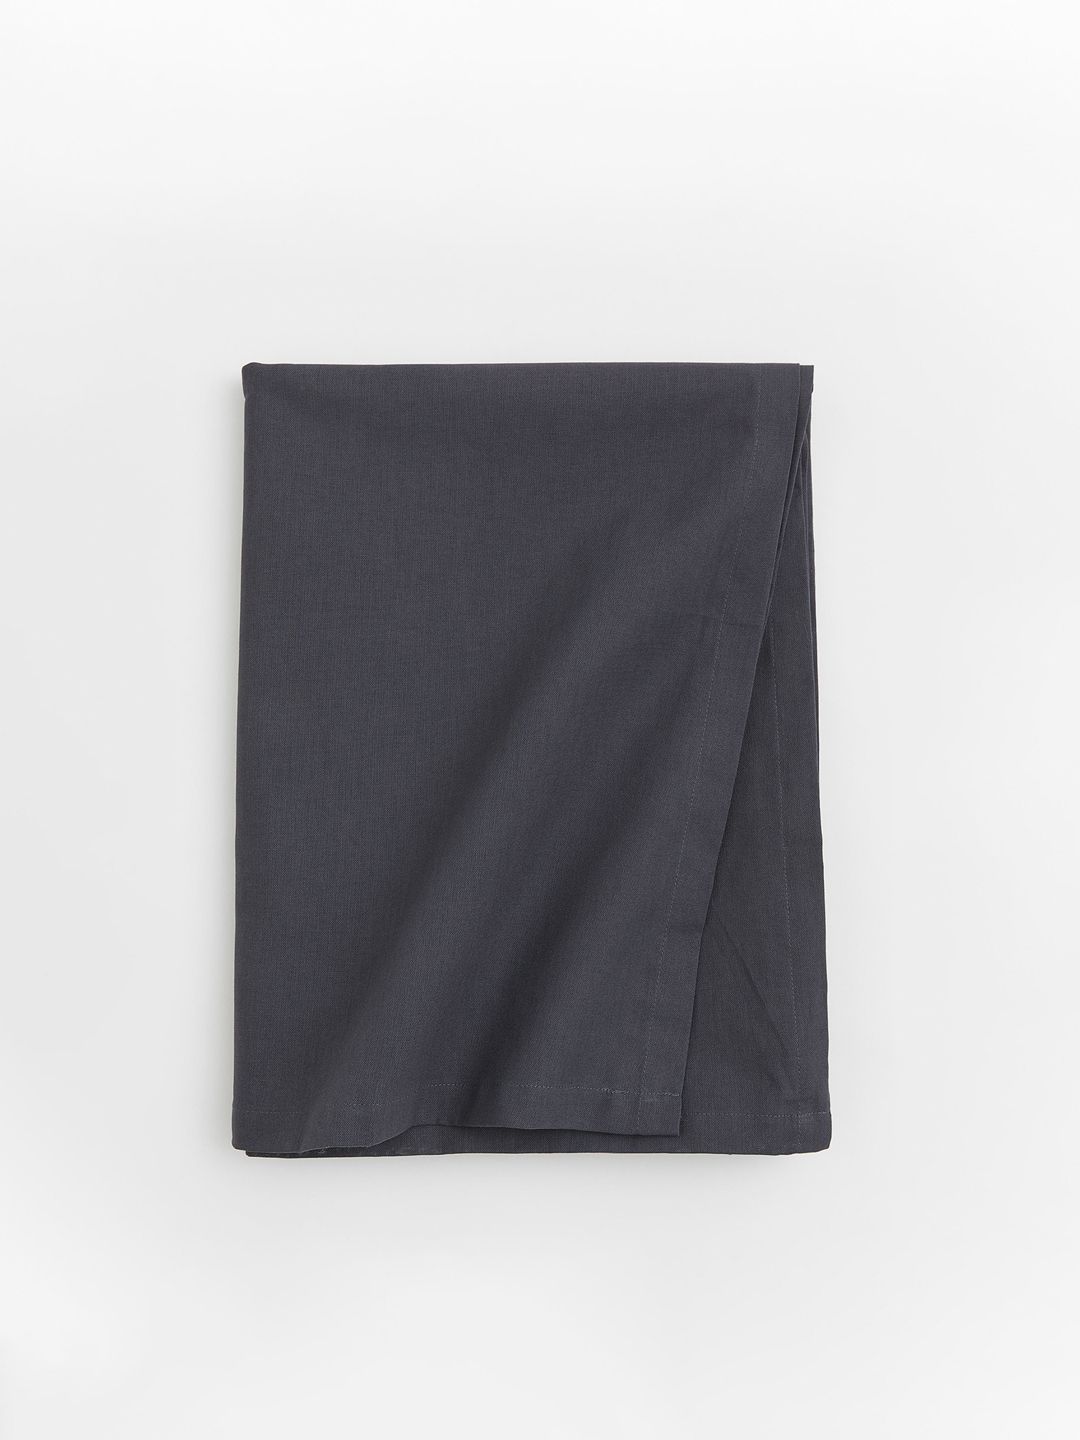 H&M Charcoal Grey Solid Cotton Tablecloth Price in India